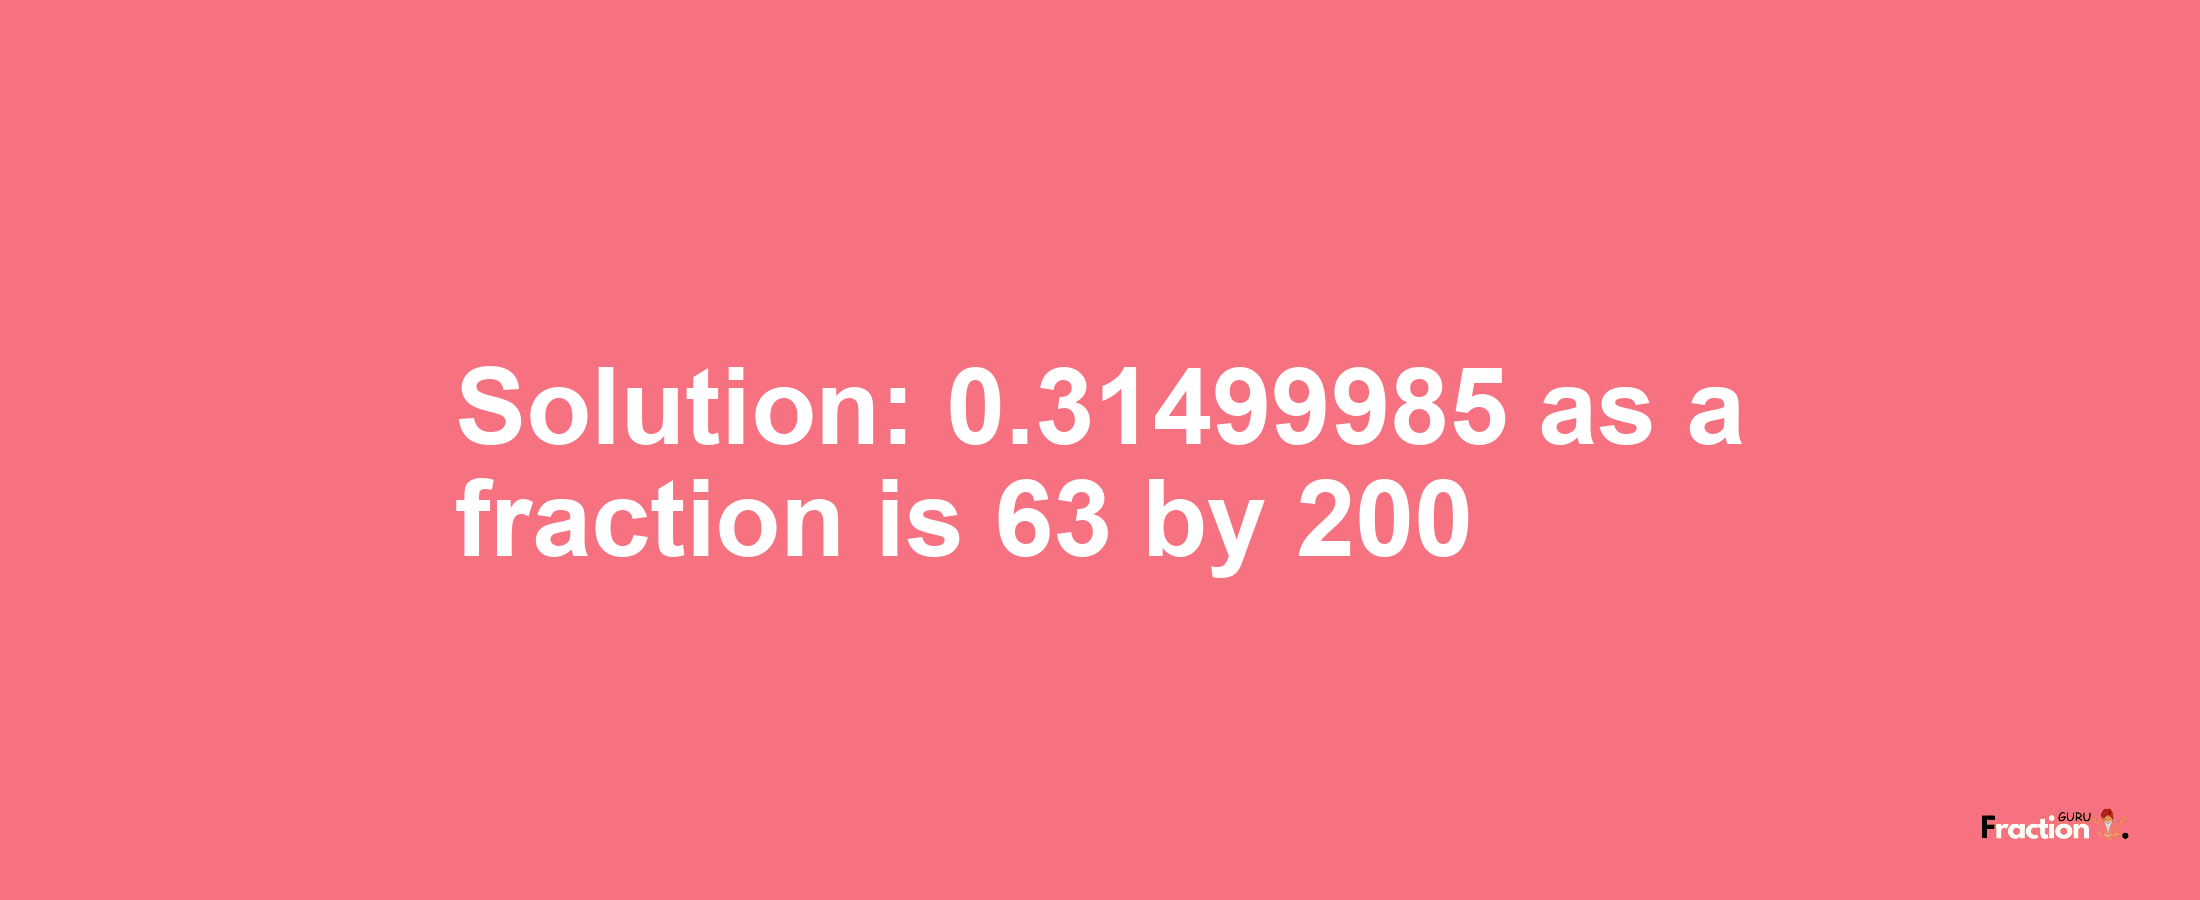 Solution:0.31499985 as a fraction is 63/200